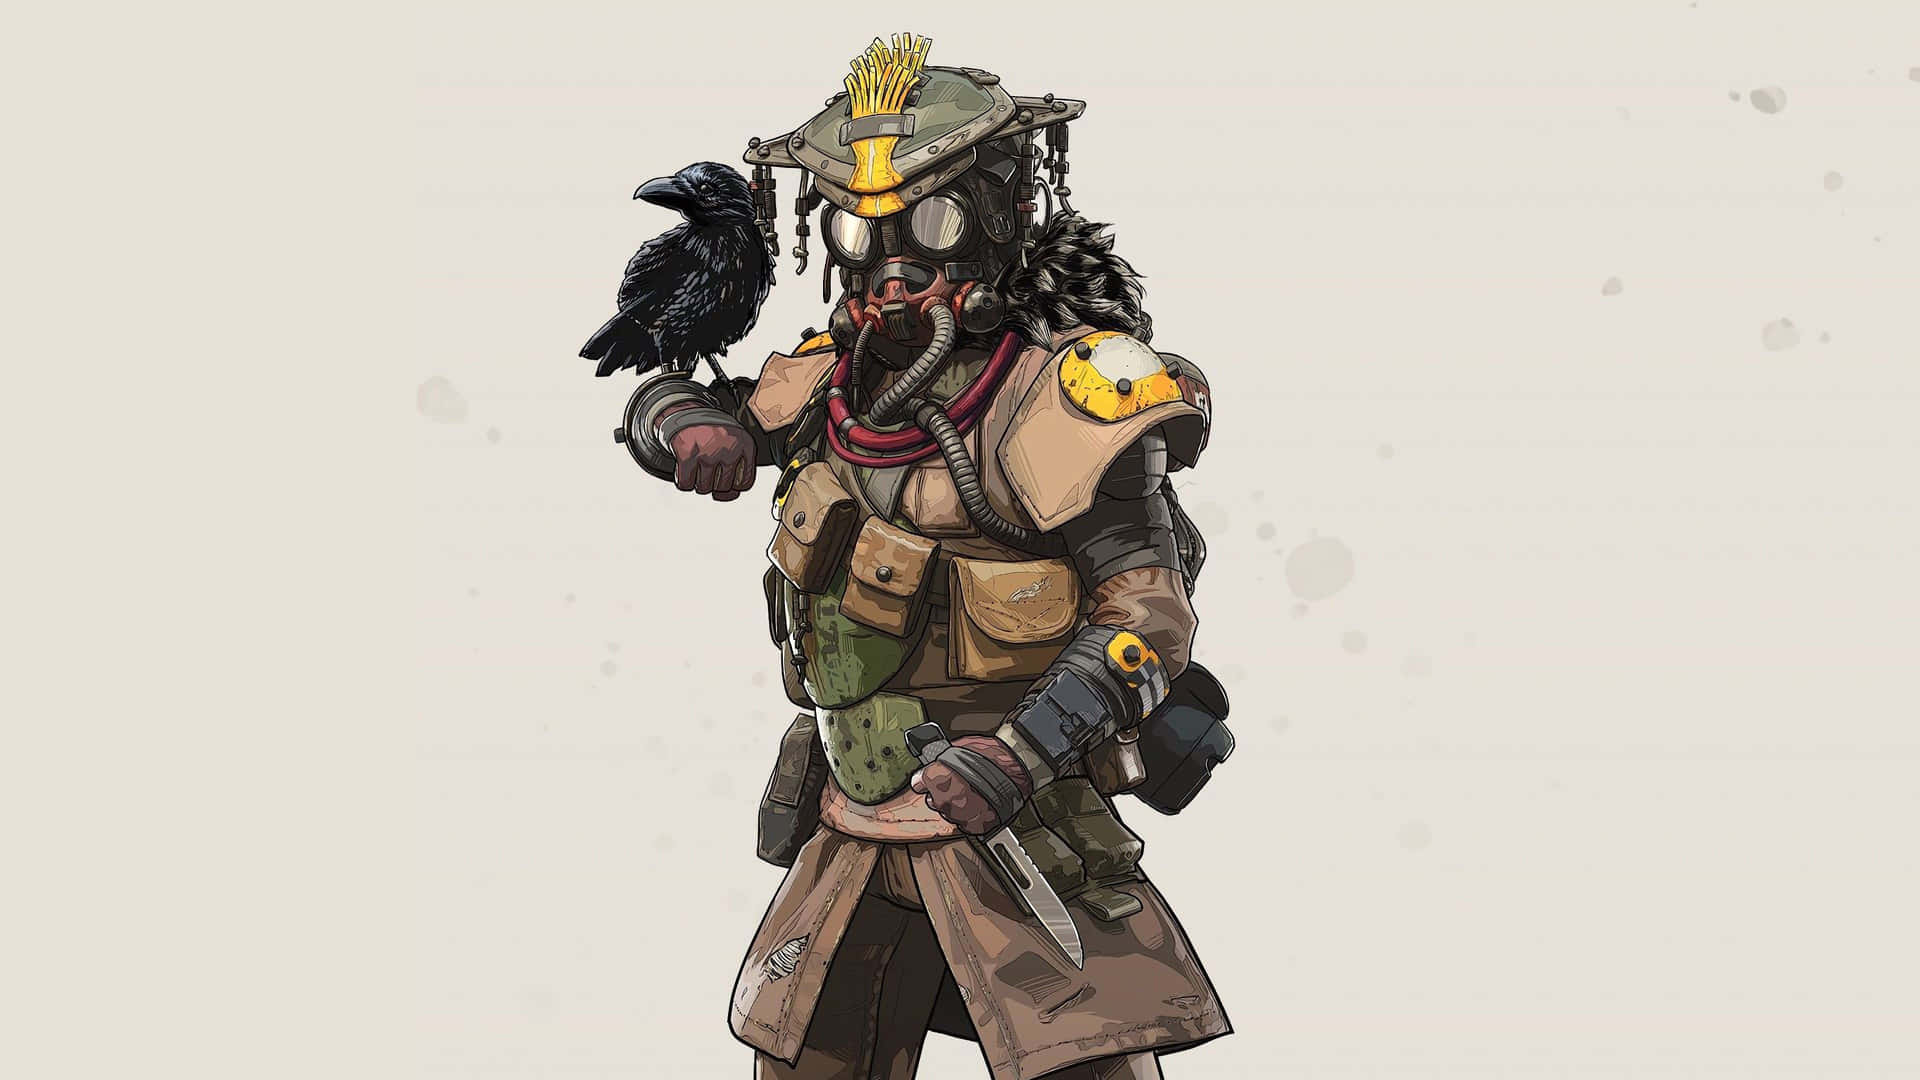 Bloodhound showing off their war paint and battle gear in the Apex Legends Arena. Wallpaper